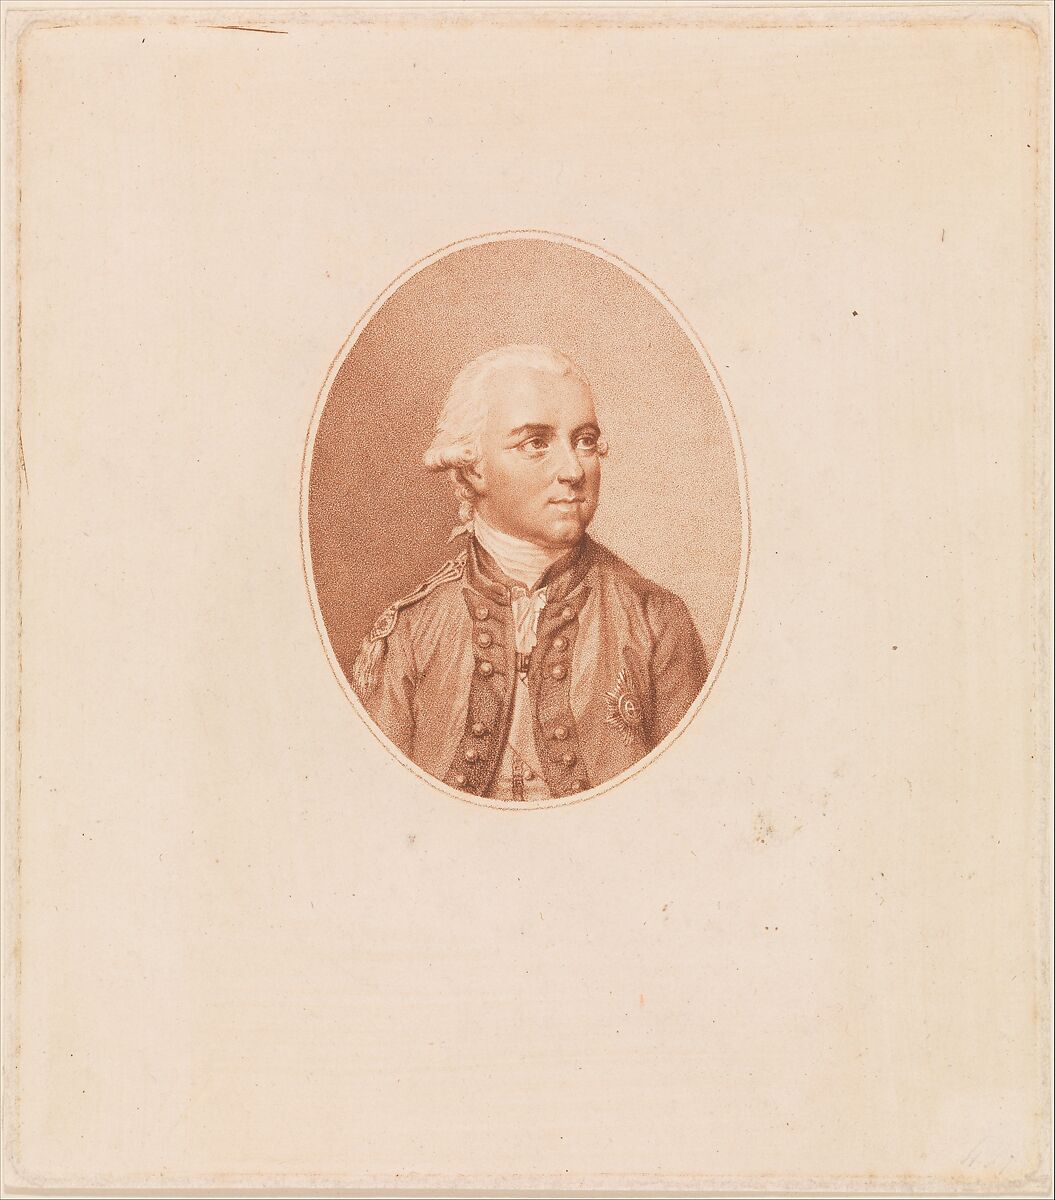 Sir Henry Clinton, Francesco Bartolozzi (Italian, Florence 1728–1815 Lisbon), Stipple engraving and etching; first state, before letters 